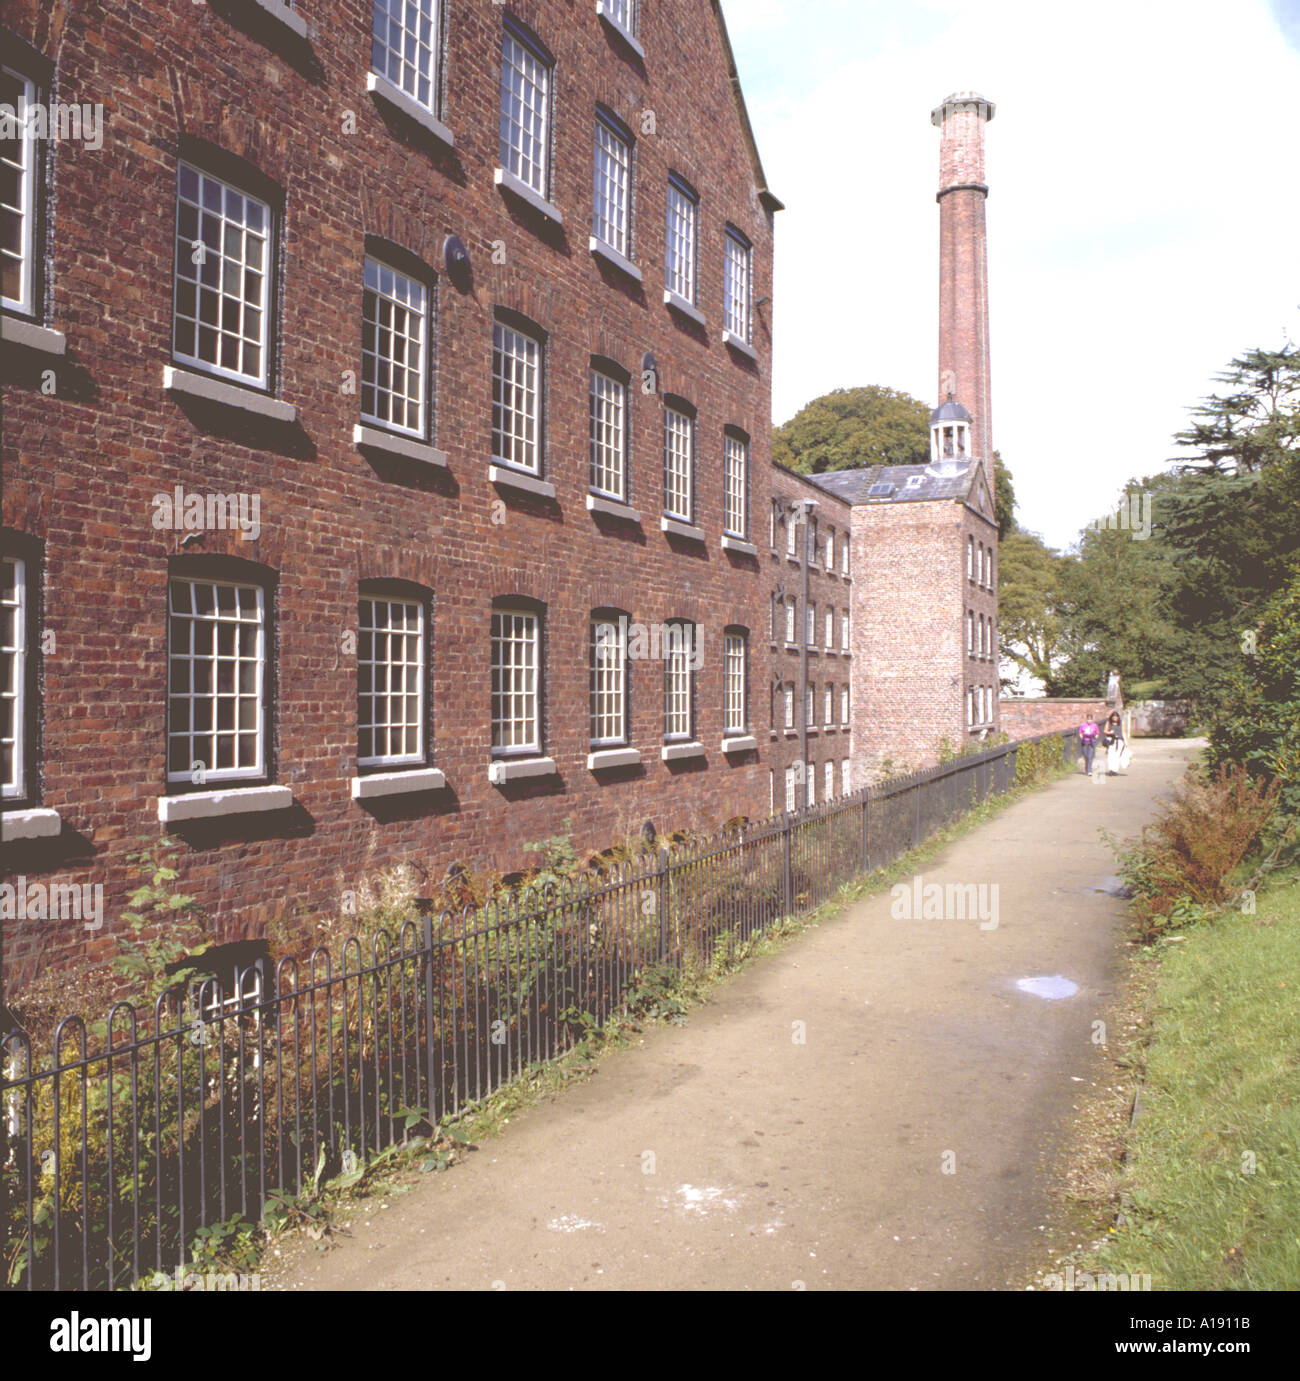 Part of the exterior of Quarry Bank Mill, Styal, north of Wilmslow, Cheshire, England, UK. Stock Photo